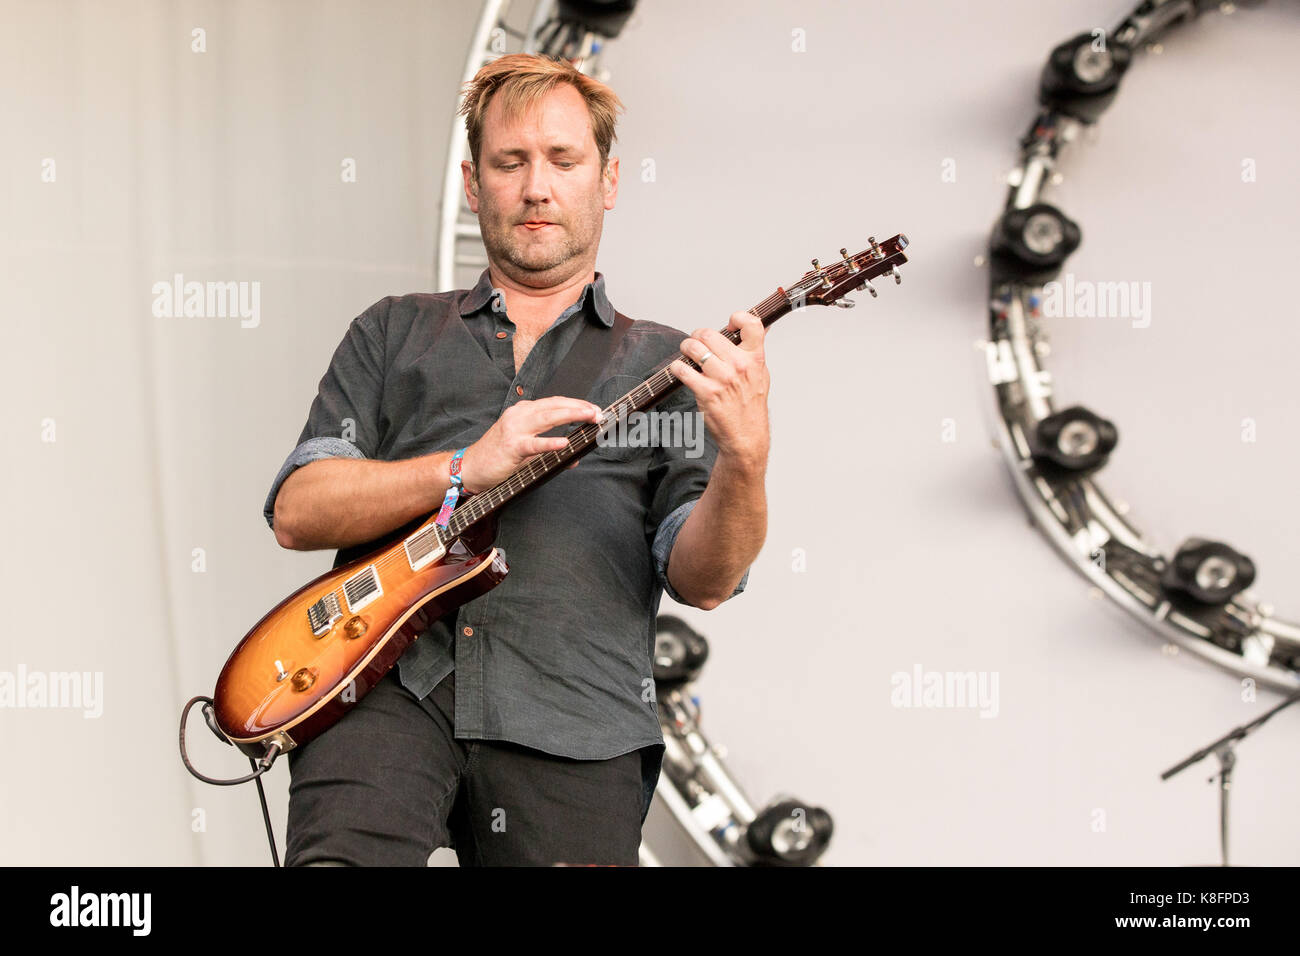 Chicago, Illinois, USA. 17th Sep, 2017. DAVE KNUDSON of Minus The Bear during Riot Fest Music Festival at Douglas Park in Chicago, Illinois Credit: Daniel DeSlover/ZUMA Wire/Alamy Live News Stock Photo